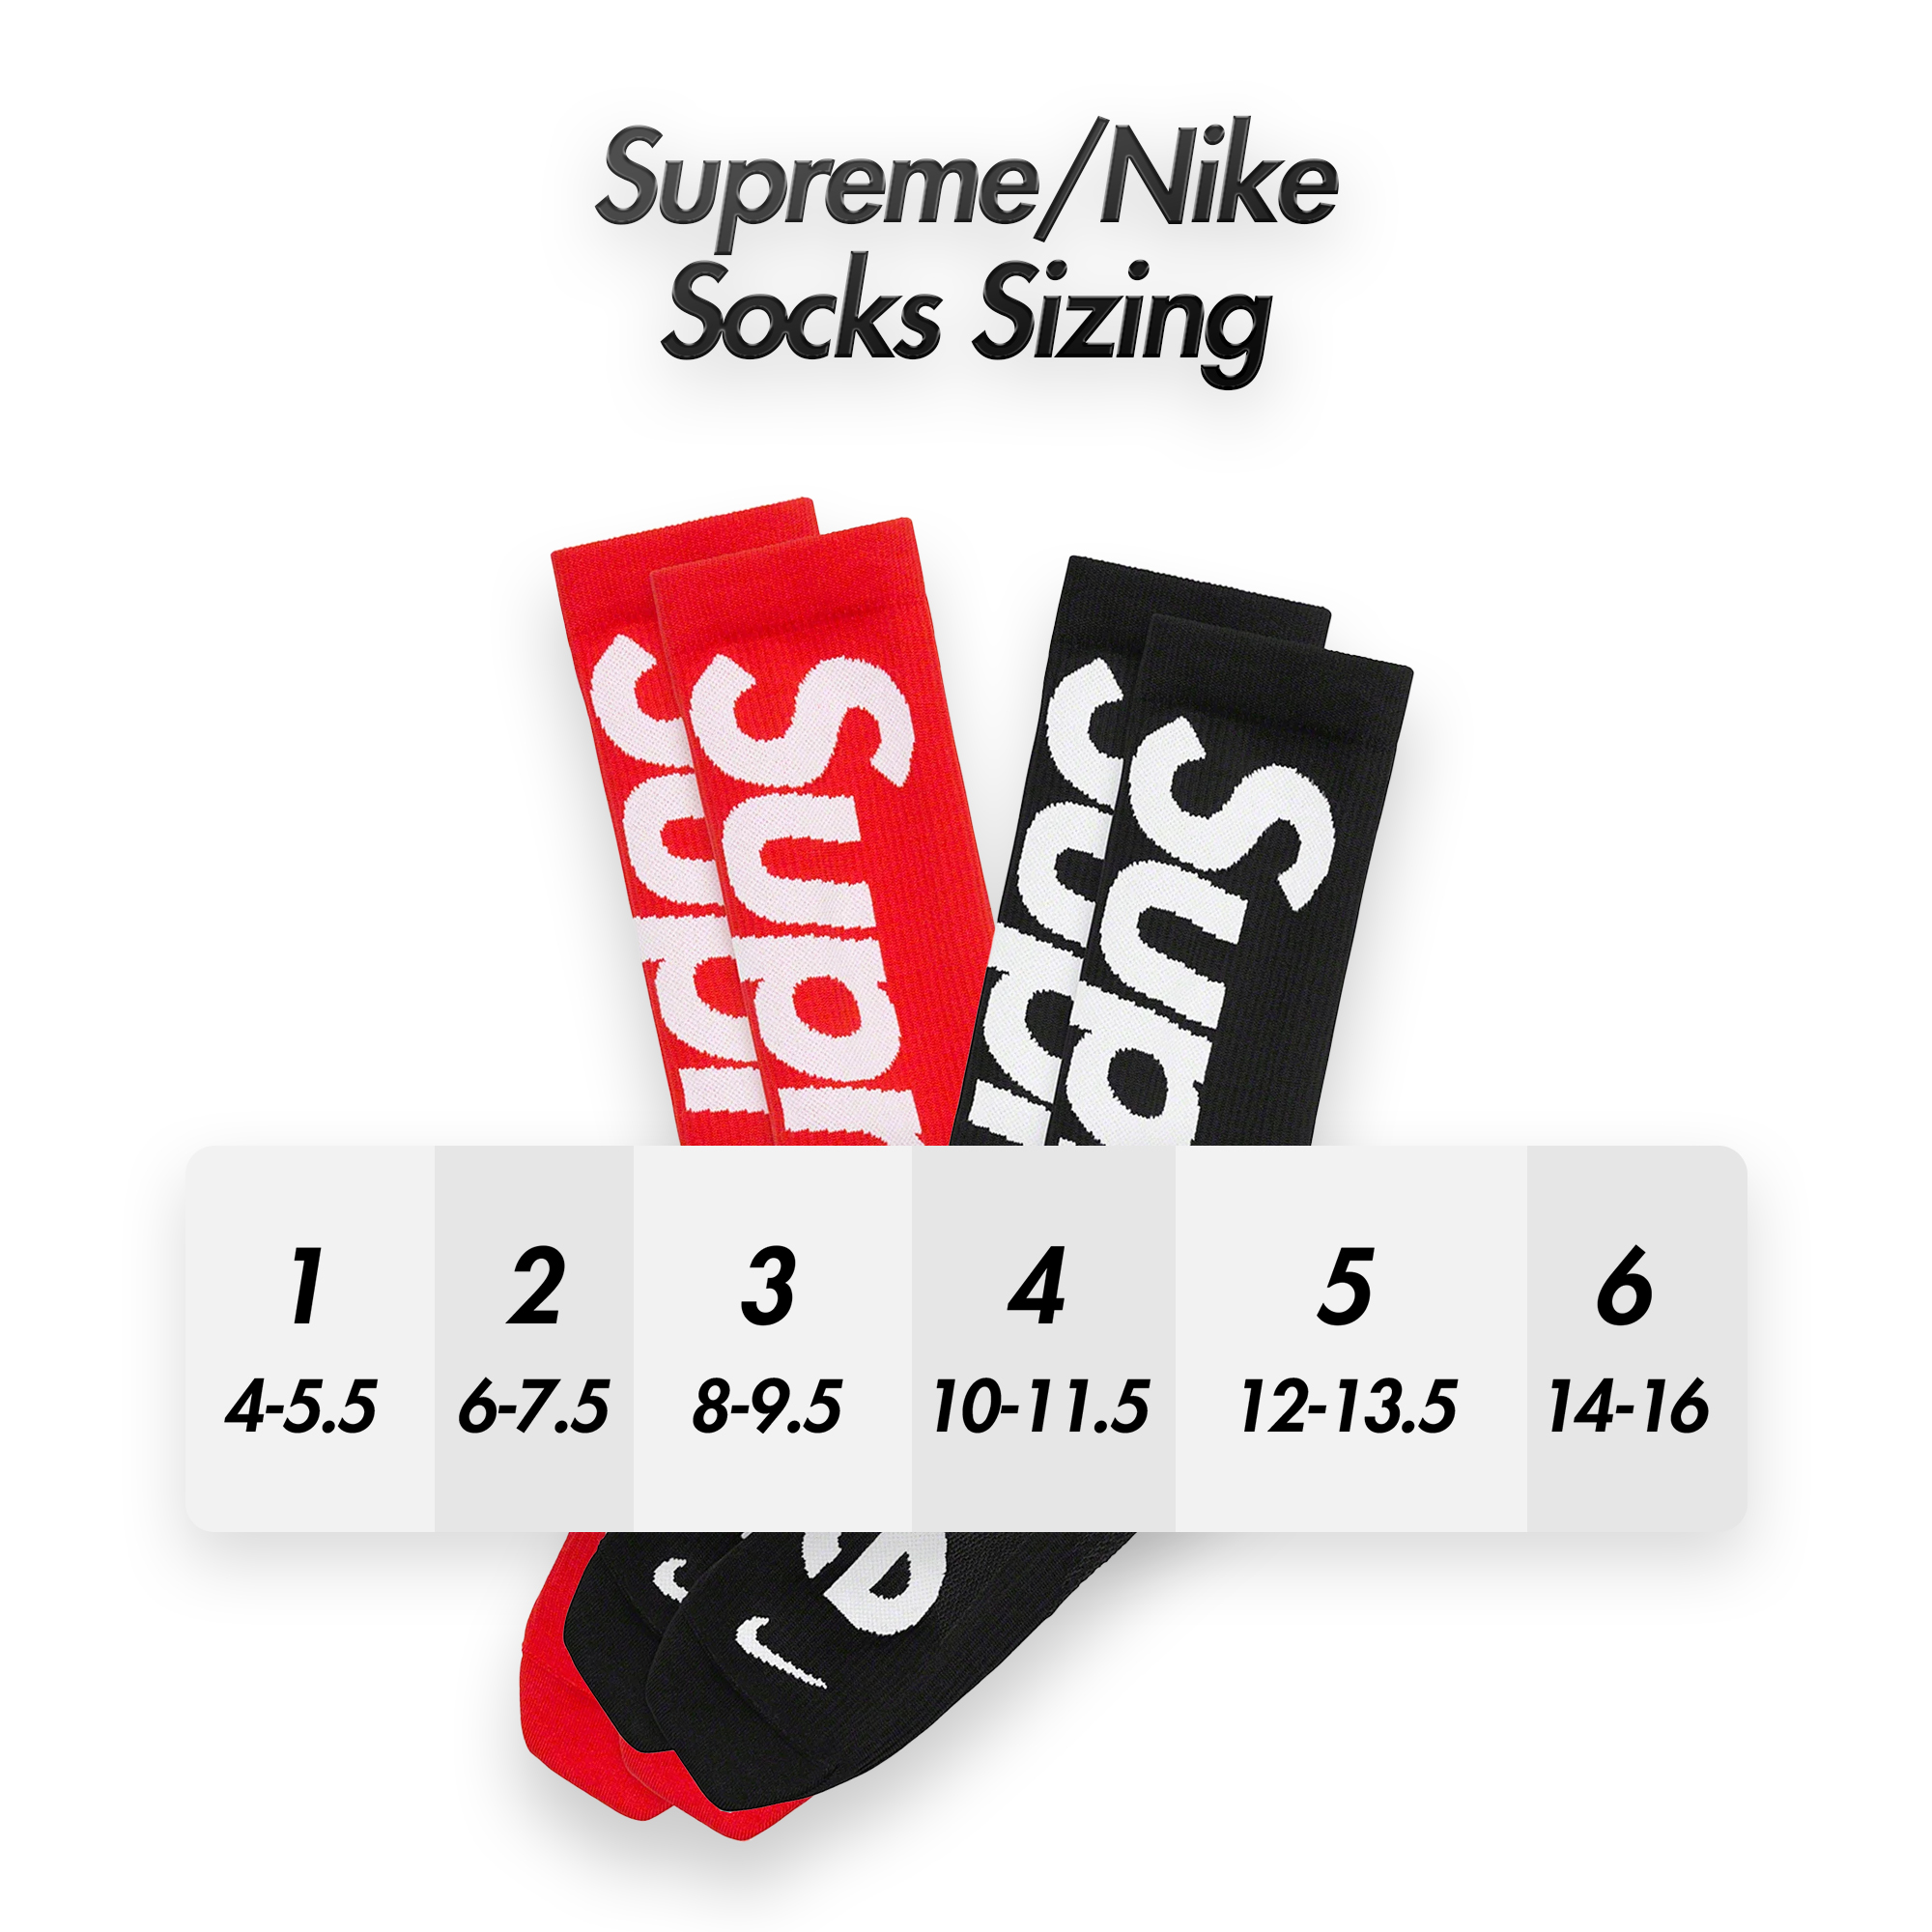 Drops on Twitter: "Little guide I made for the Supreme/Nike Sizing https://t.co/t4BrVUglaN" / Twitter